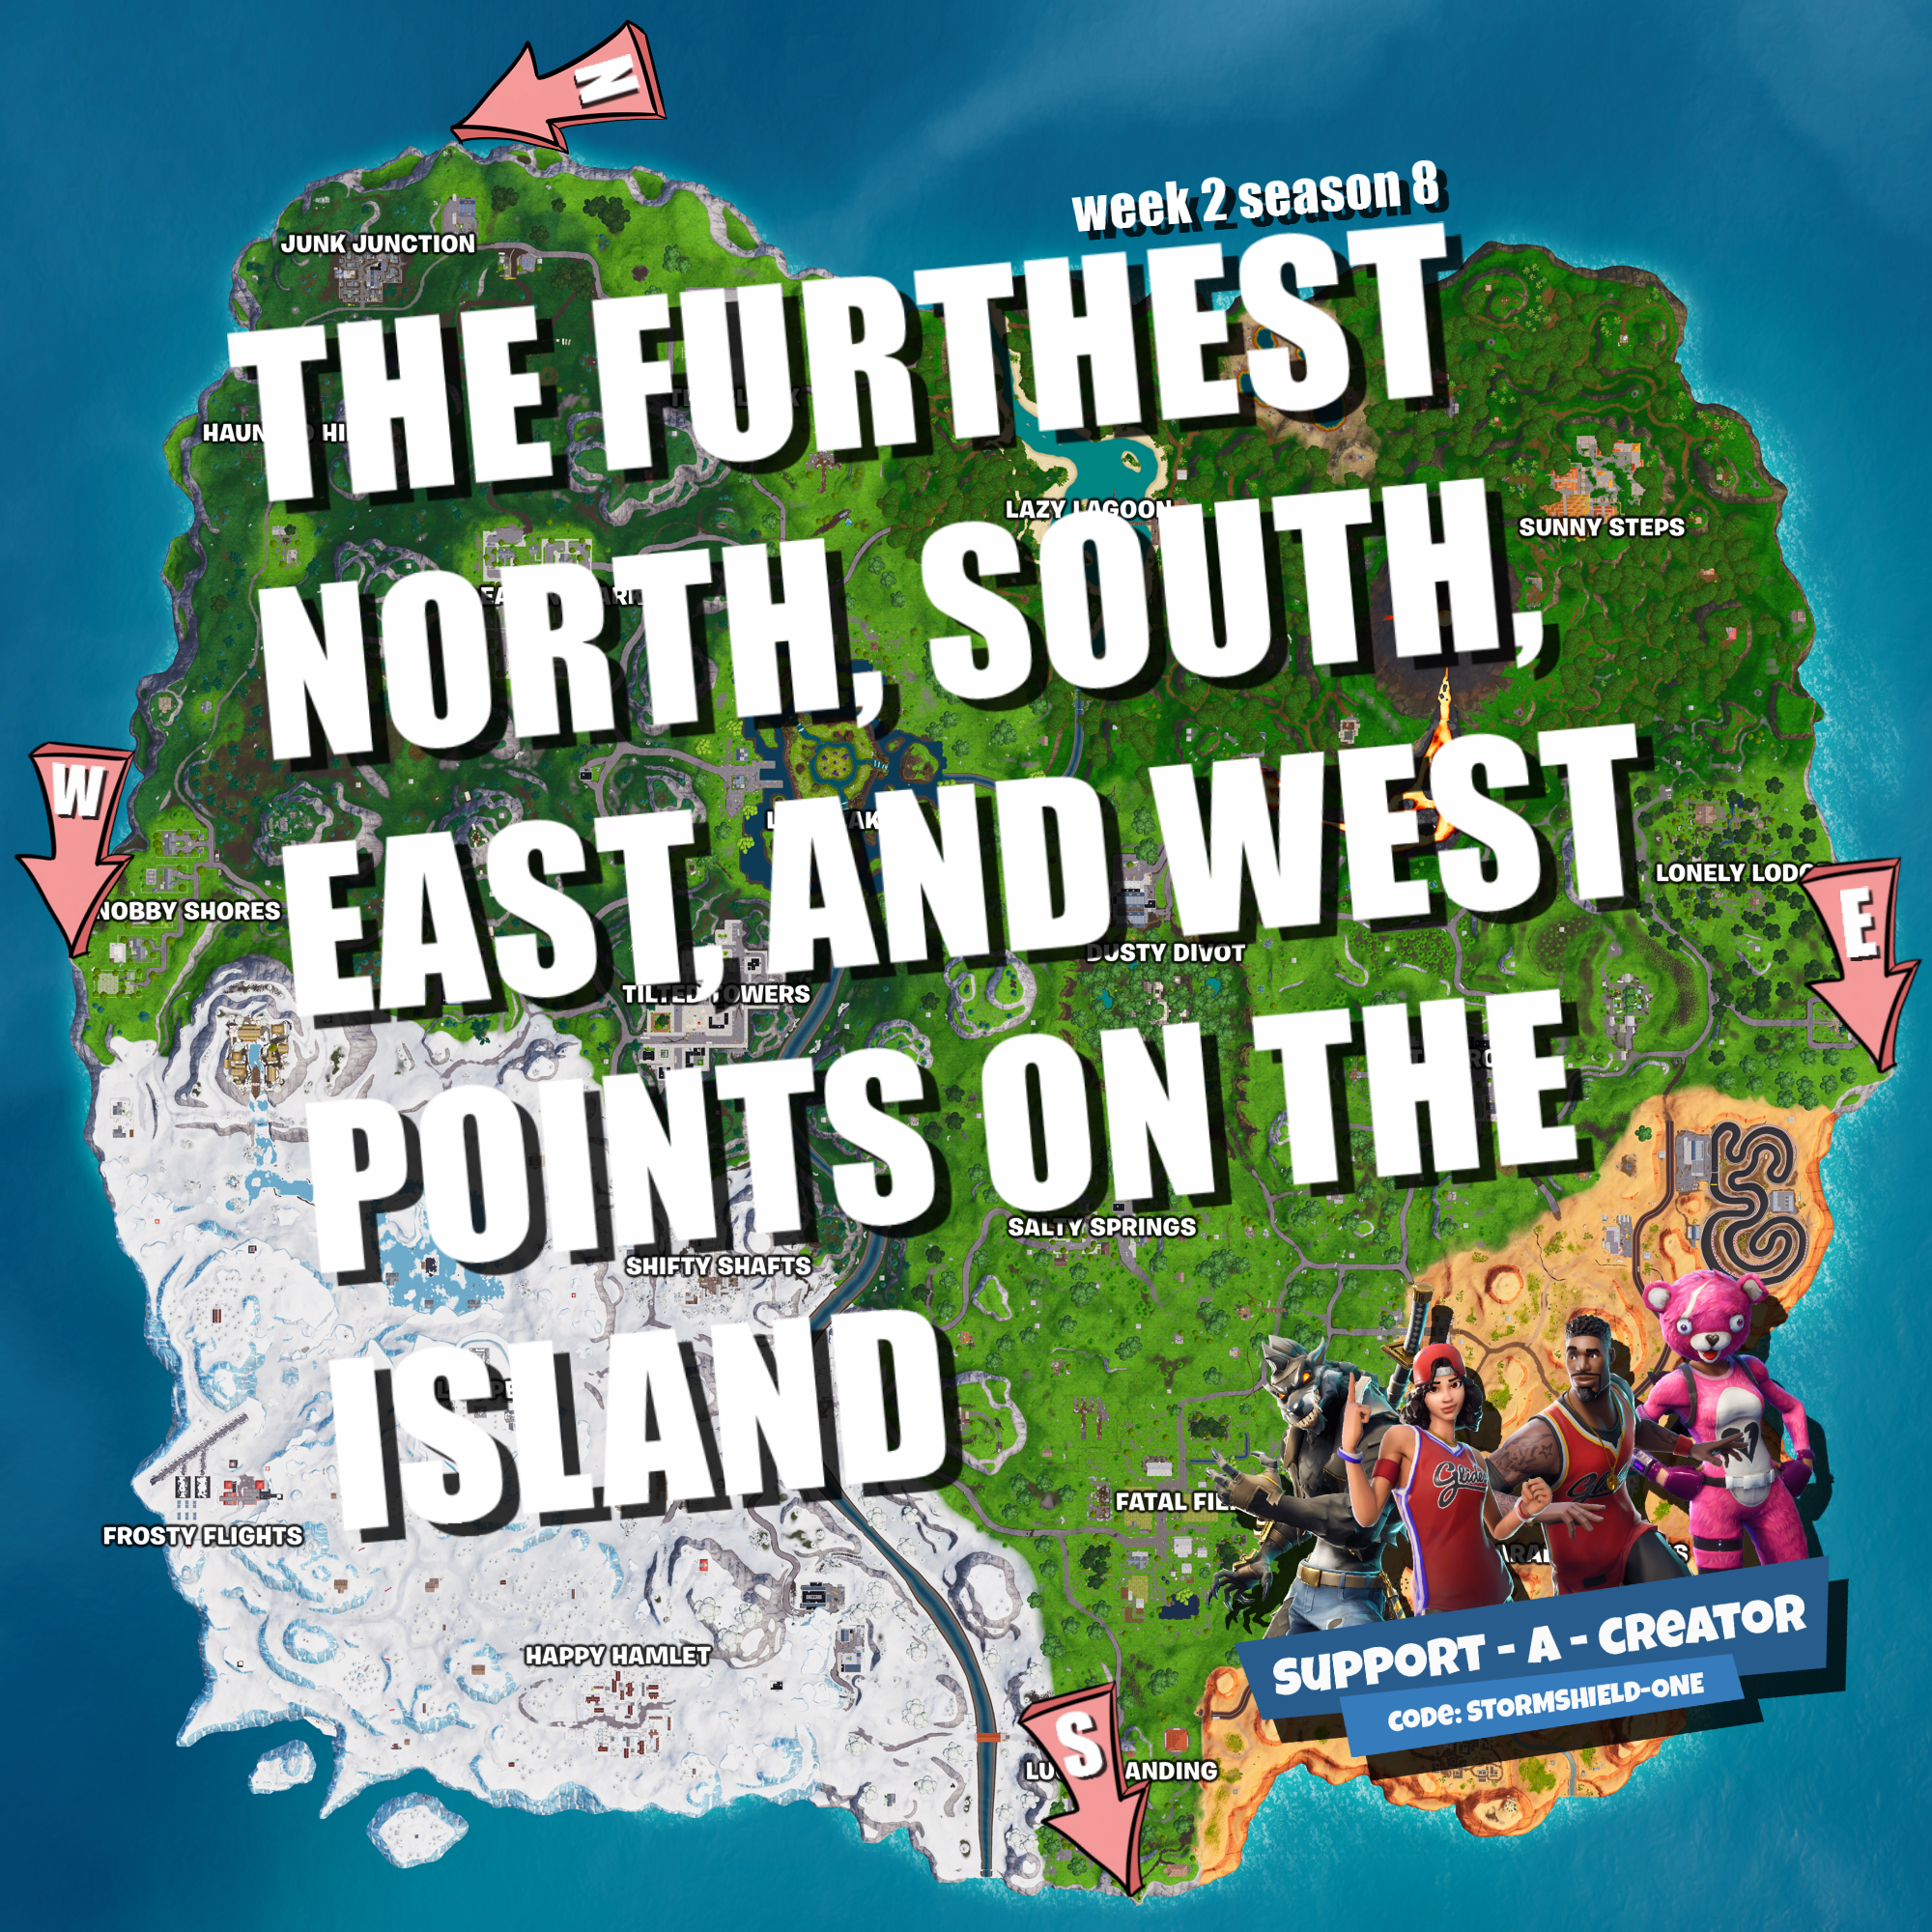 visit the furthest north south east and west points of the island right click view image for full resolution - visit the most north south east west fortnite